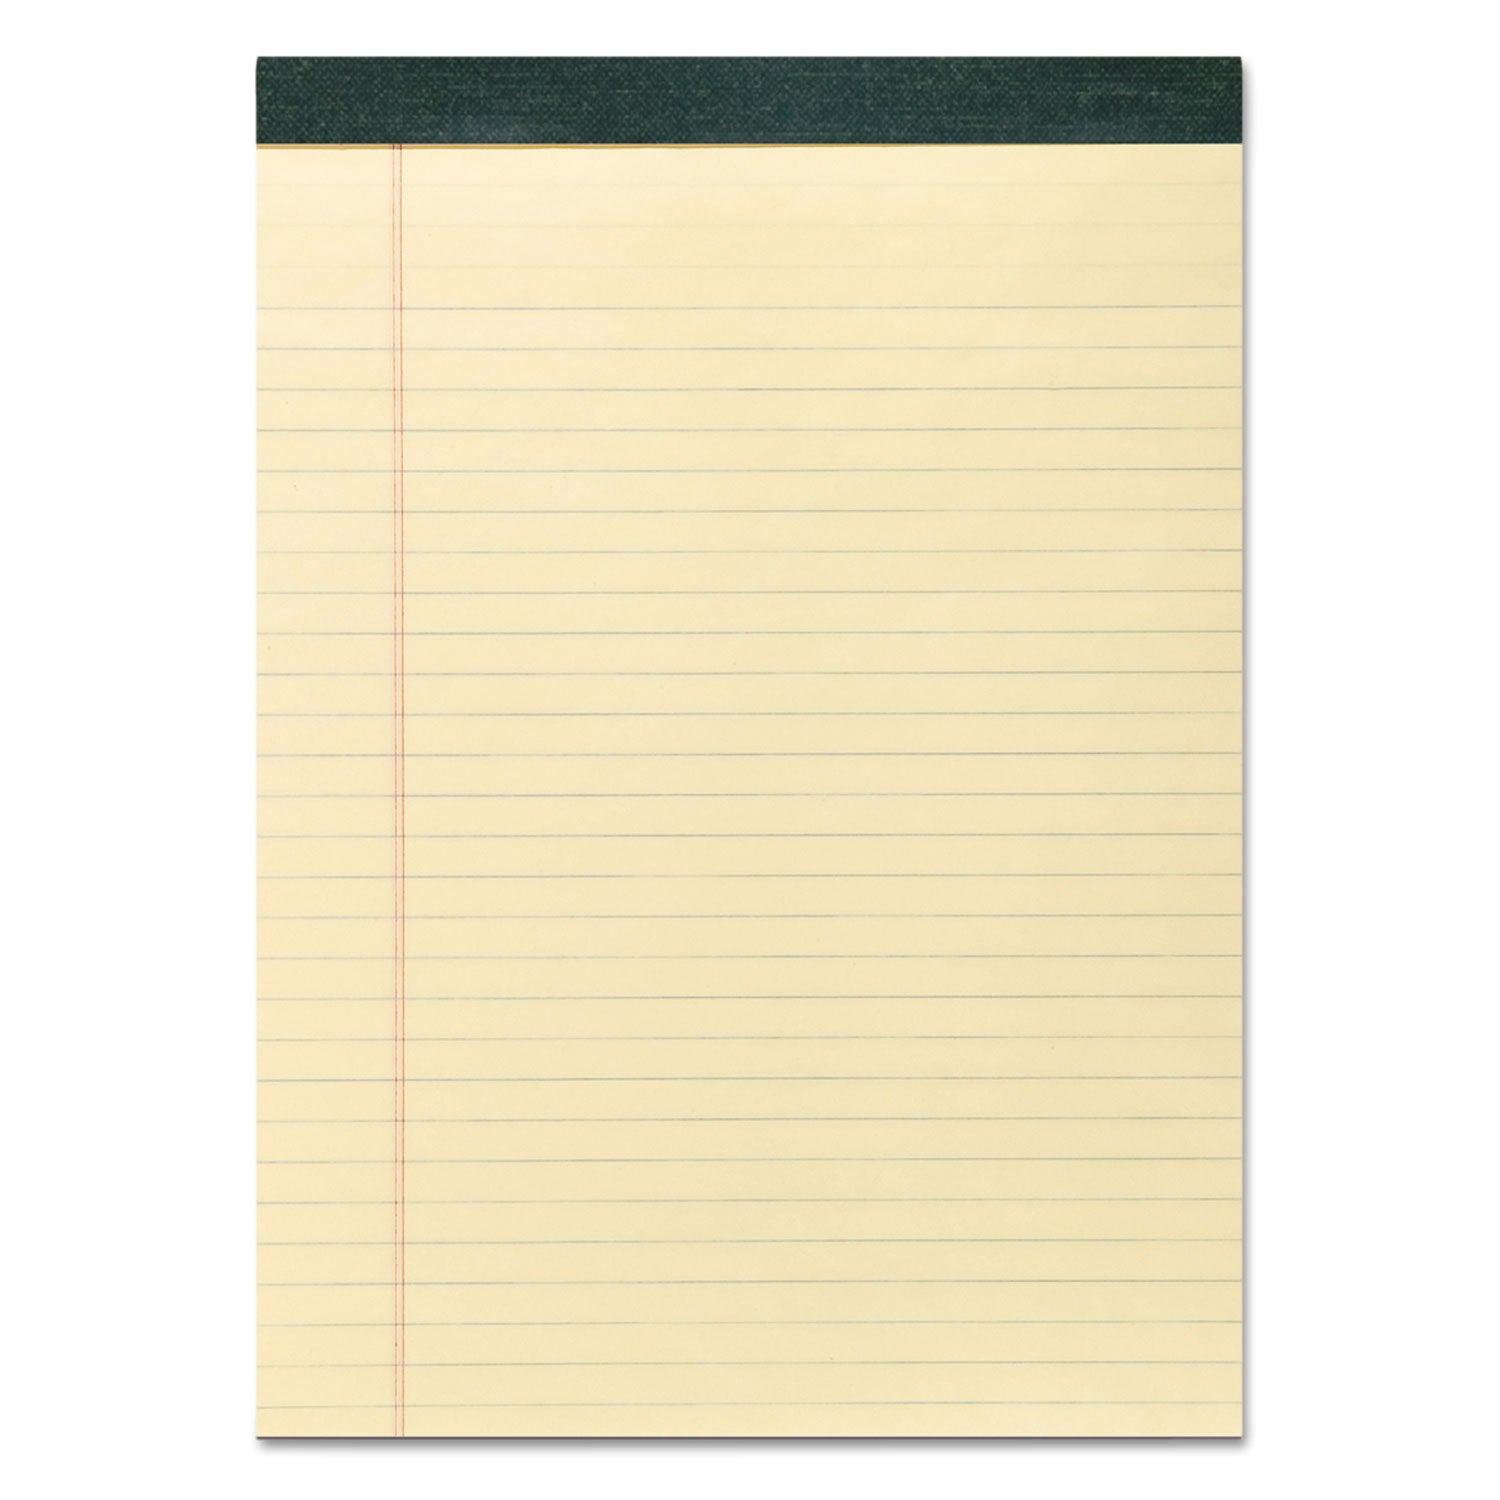 Recycled Legal Pad, Wide/Legal Rule, 40 Canary-Yellow 8.5 x 11 Sheets, Dozen - 